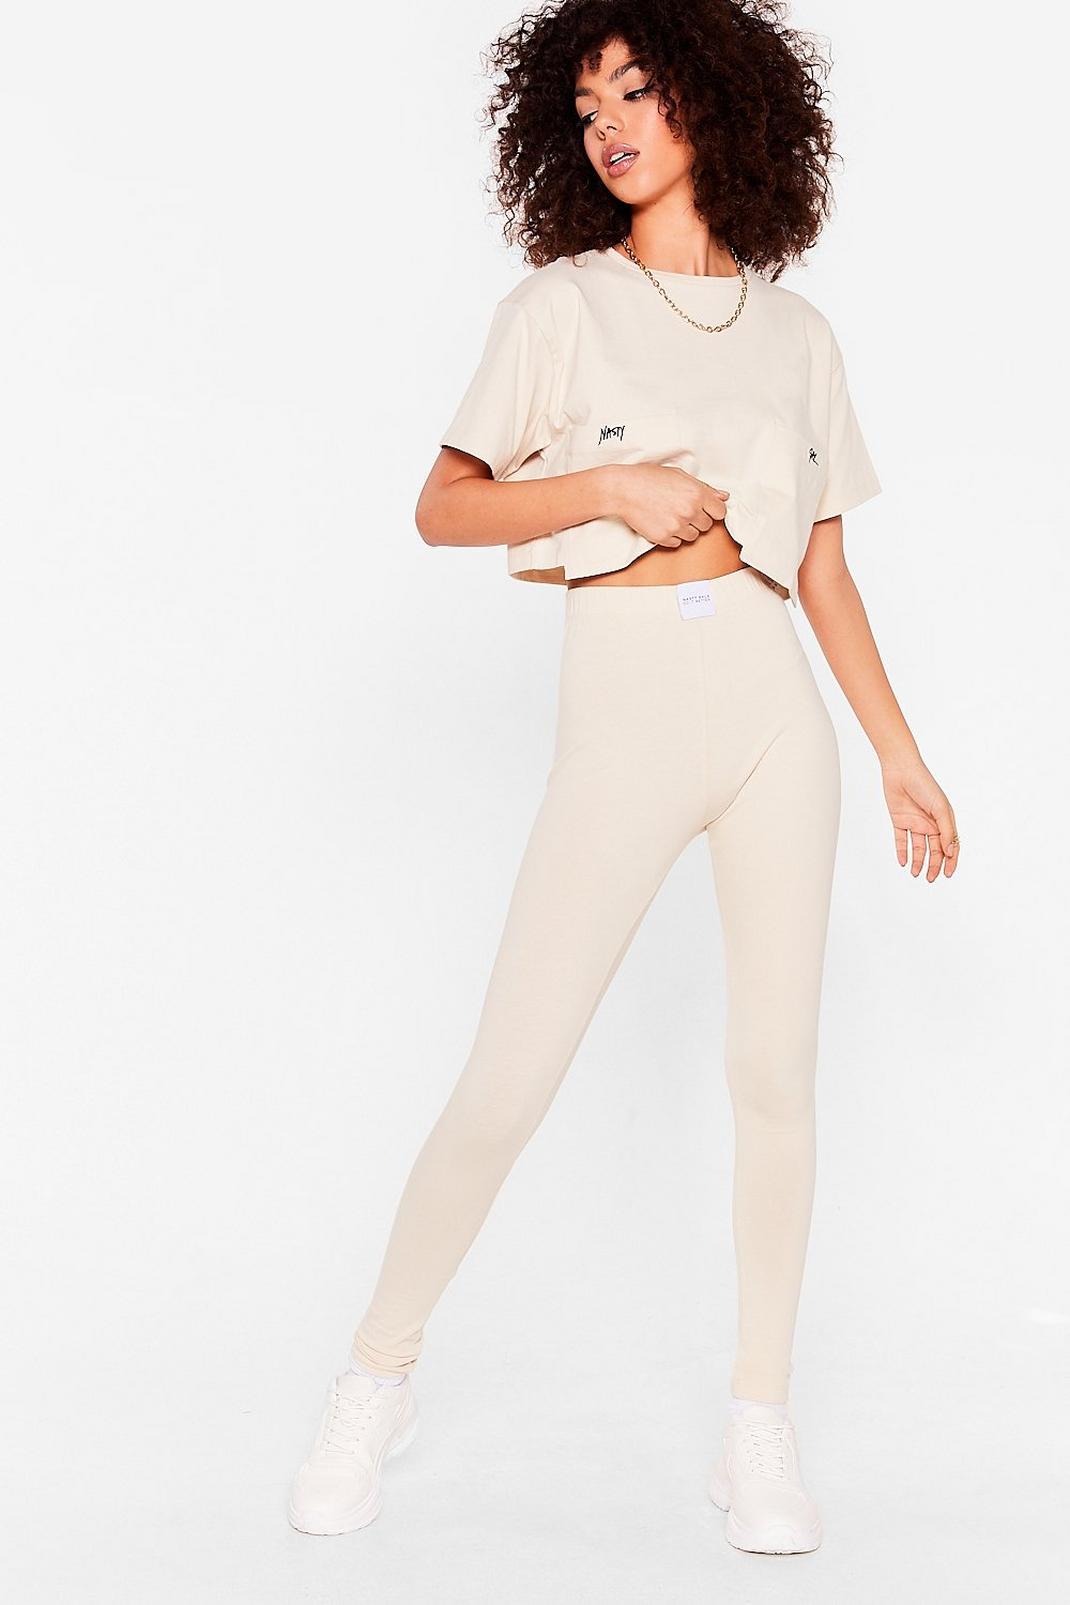 Stone Nothing But a Nasty Gal High-Waisted Leggings image number 1